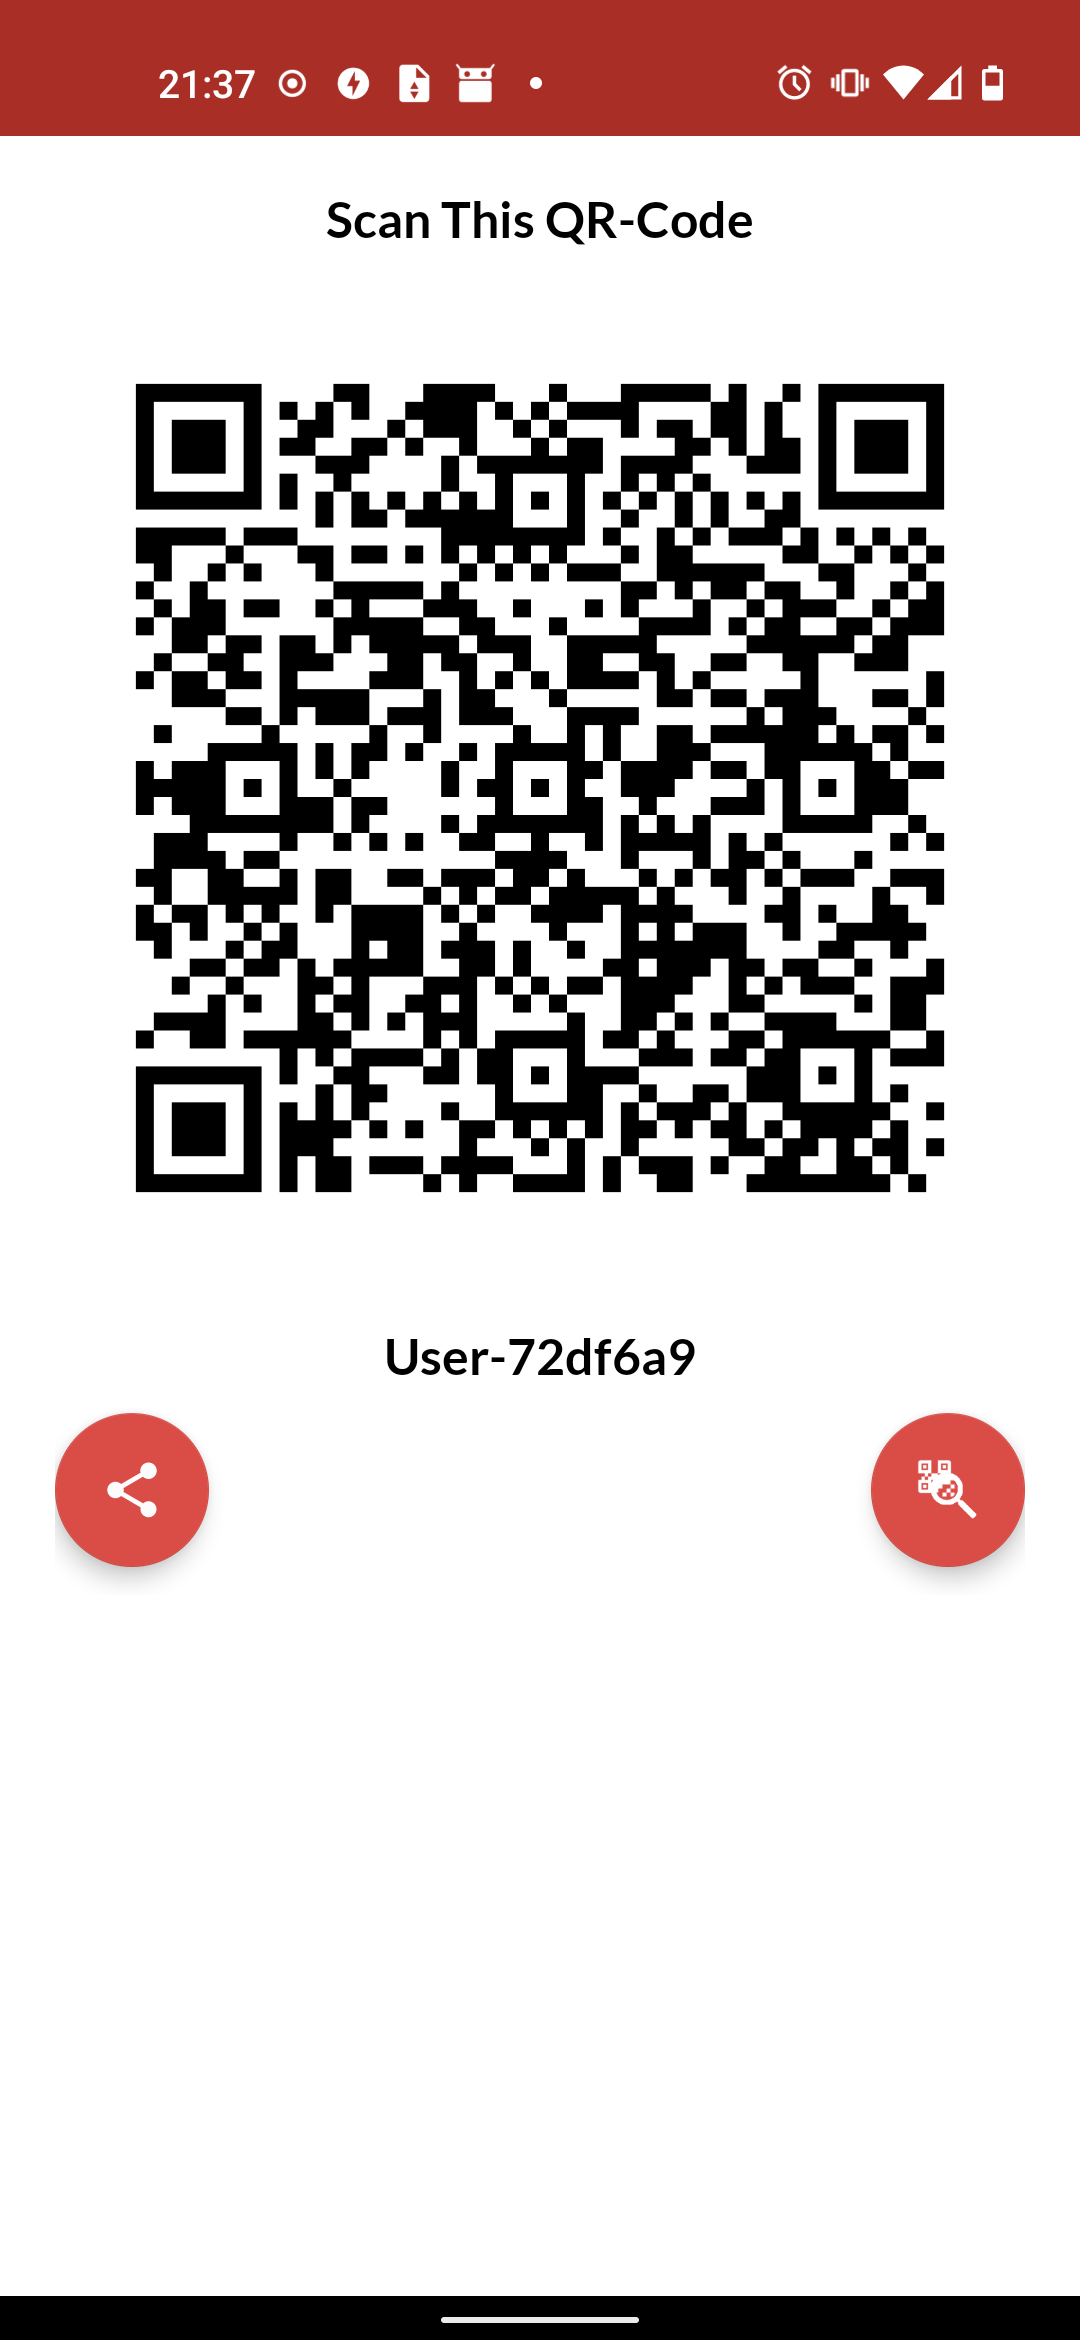 qrcode_4.0.4.png